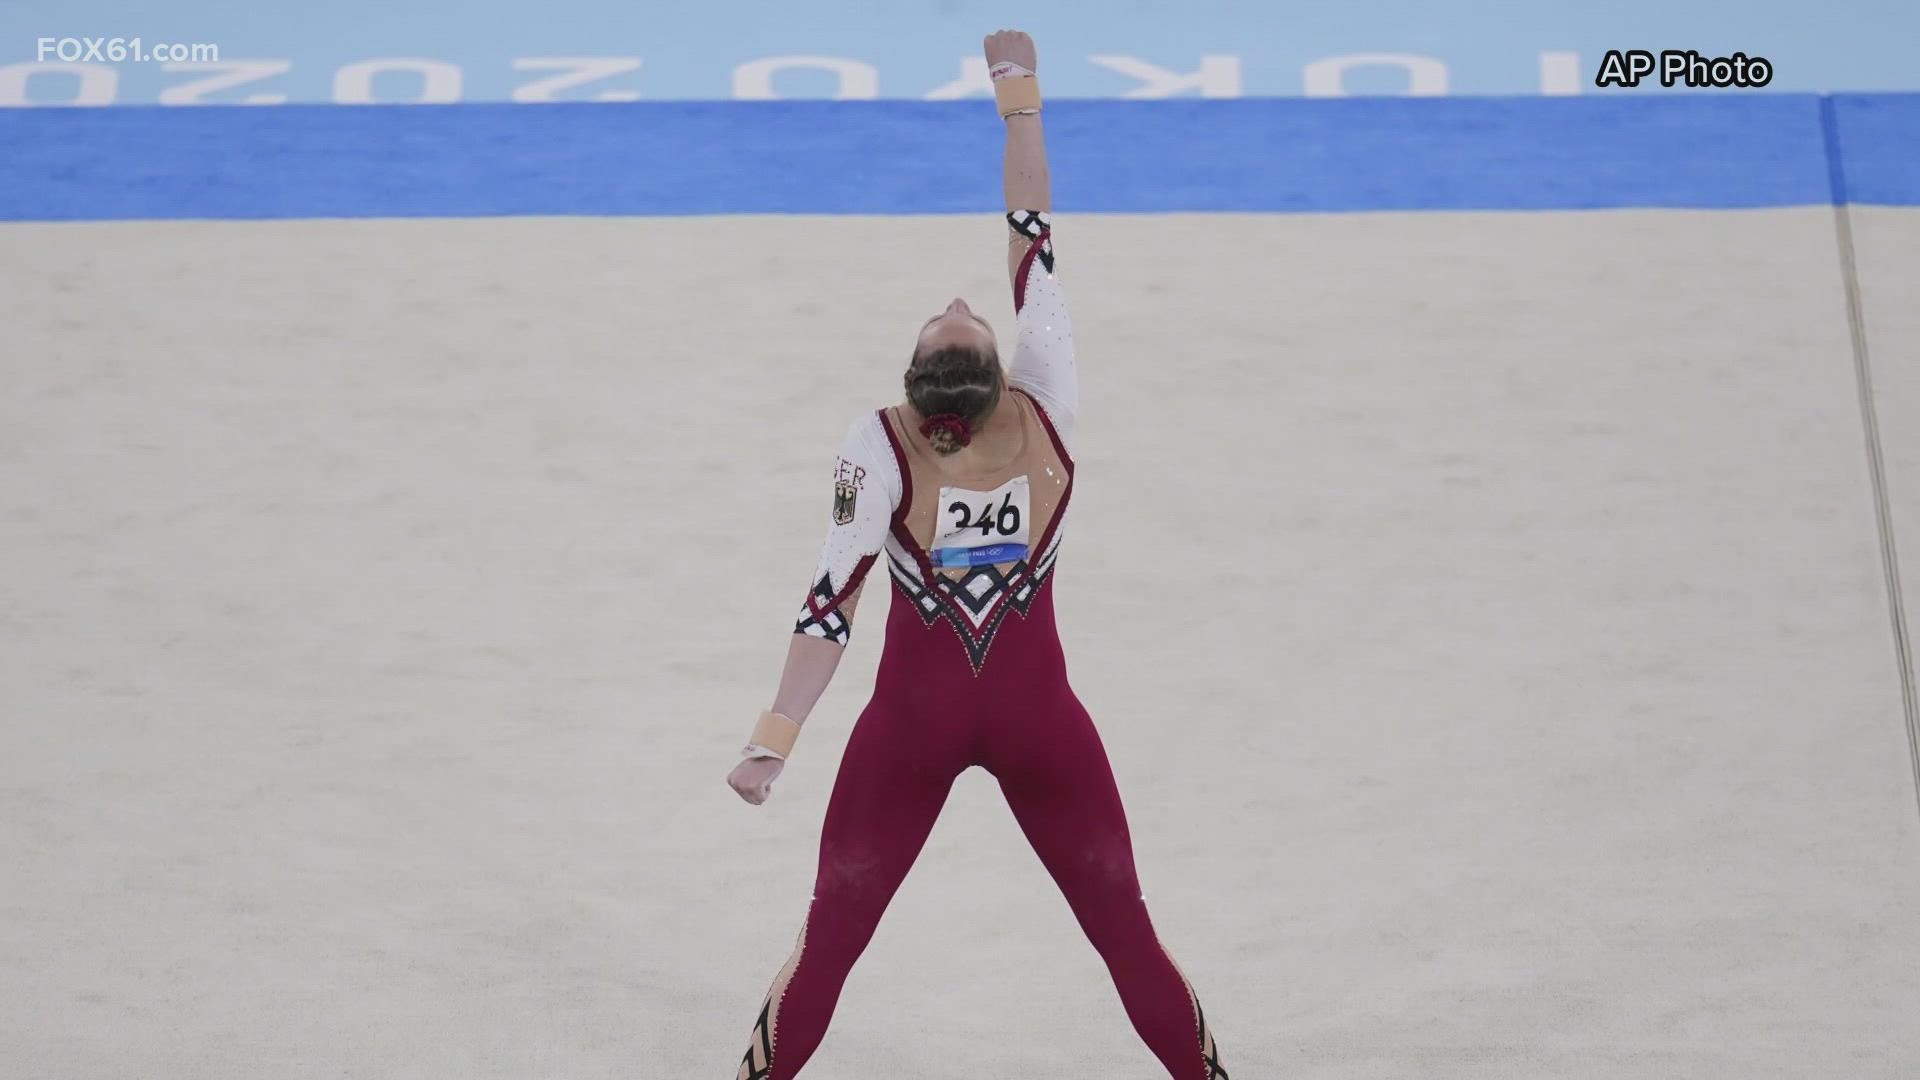 How Olympic Gymnastics Leotards Have Changed Over the Years